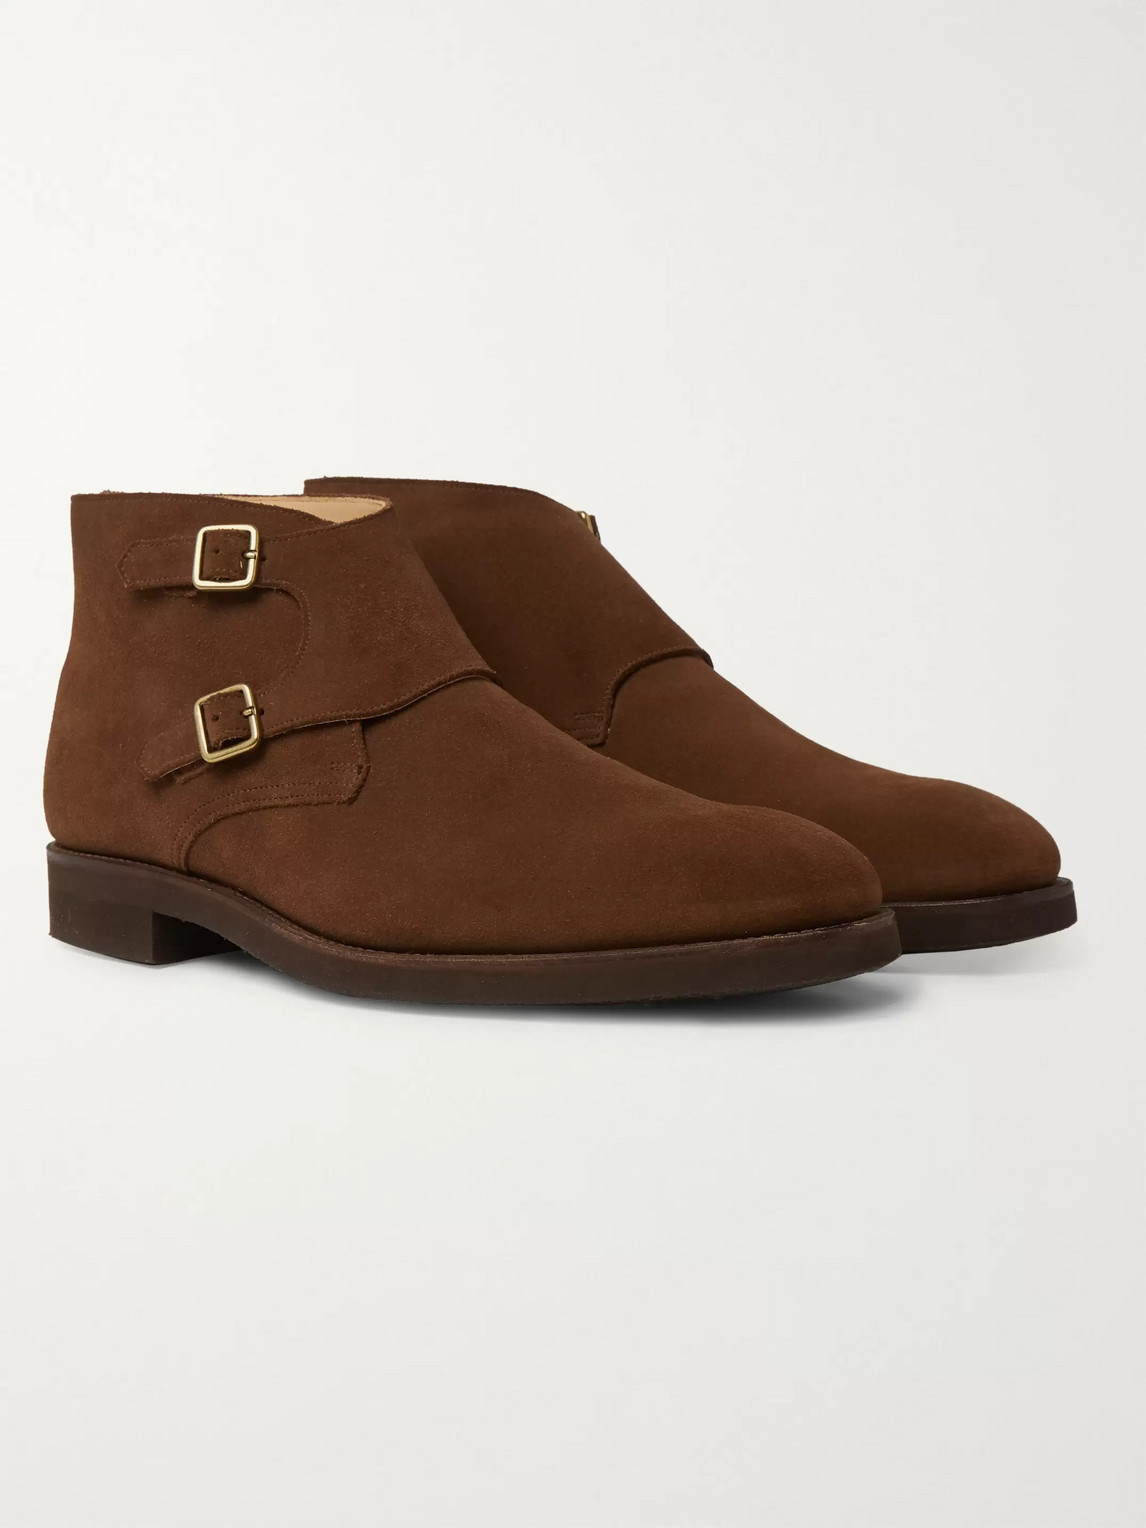 George Cleverley Fry Suede Monk-strap Boots In Brown